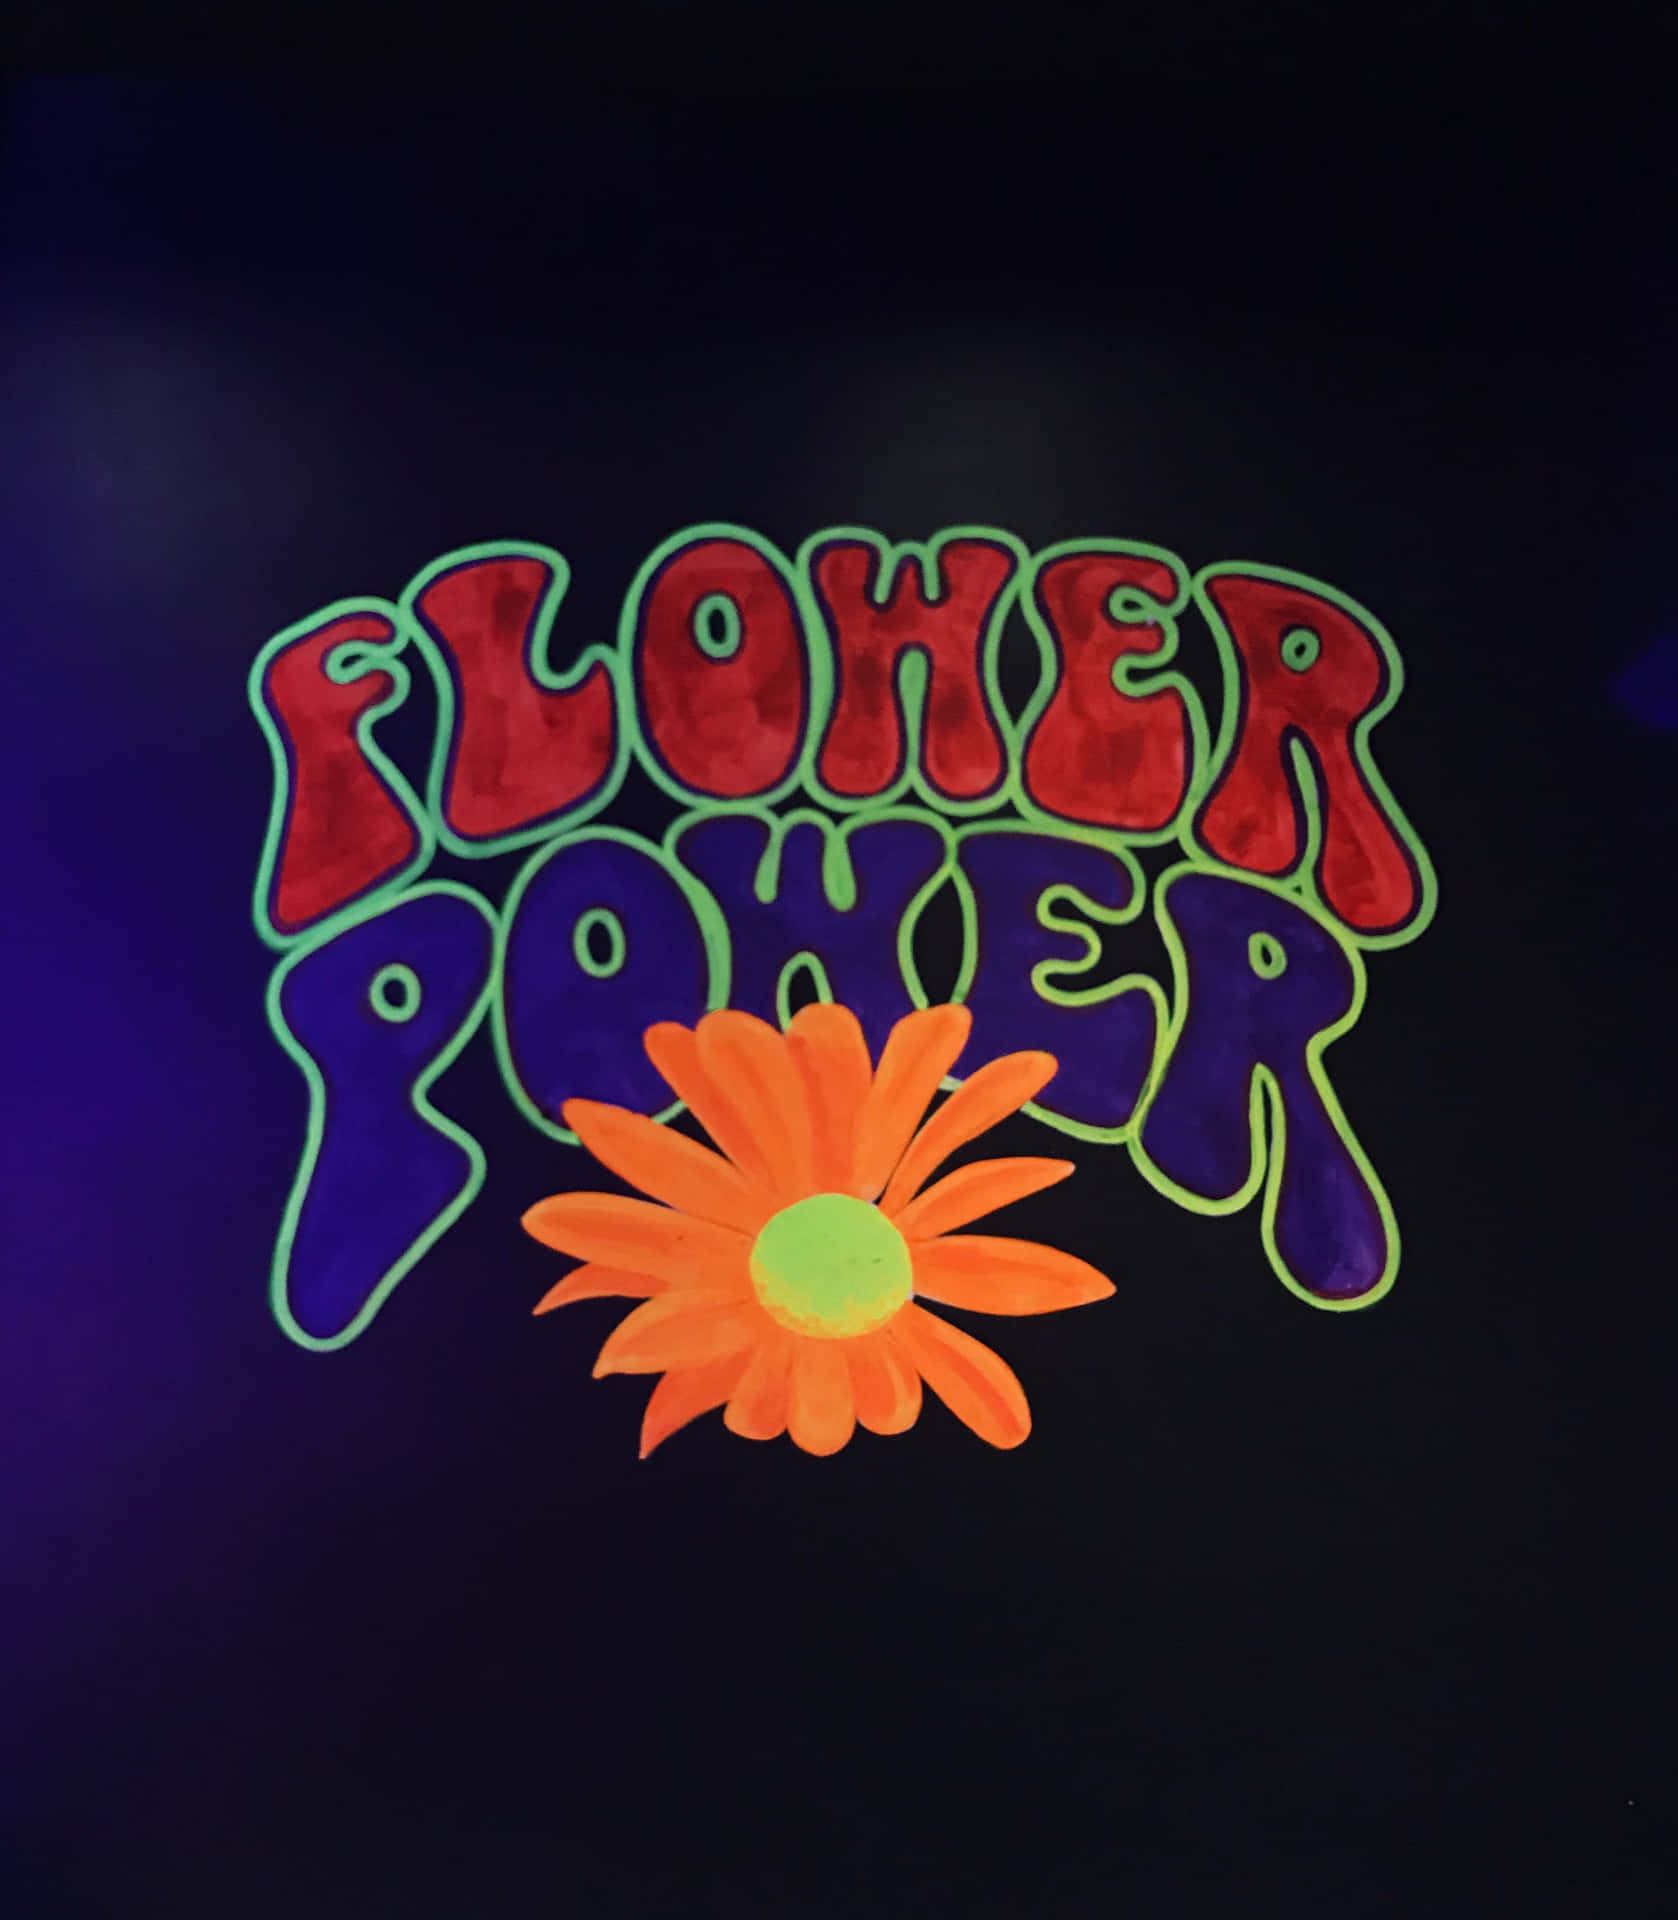 Flower Power - A Neon Sign With A Flower Wallpaper